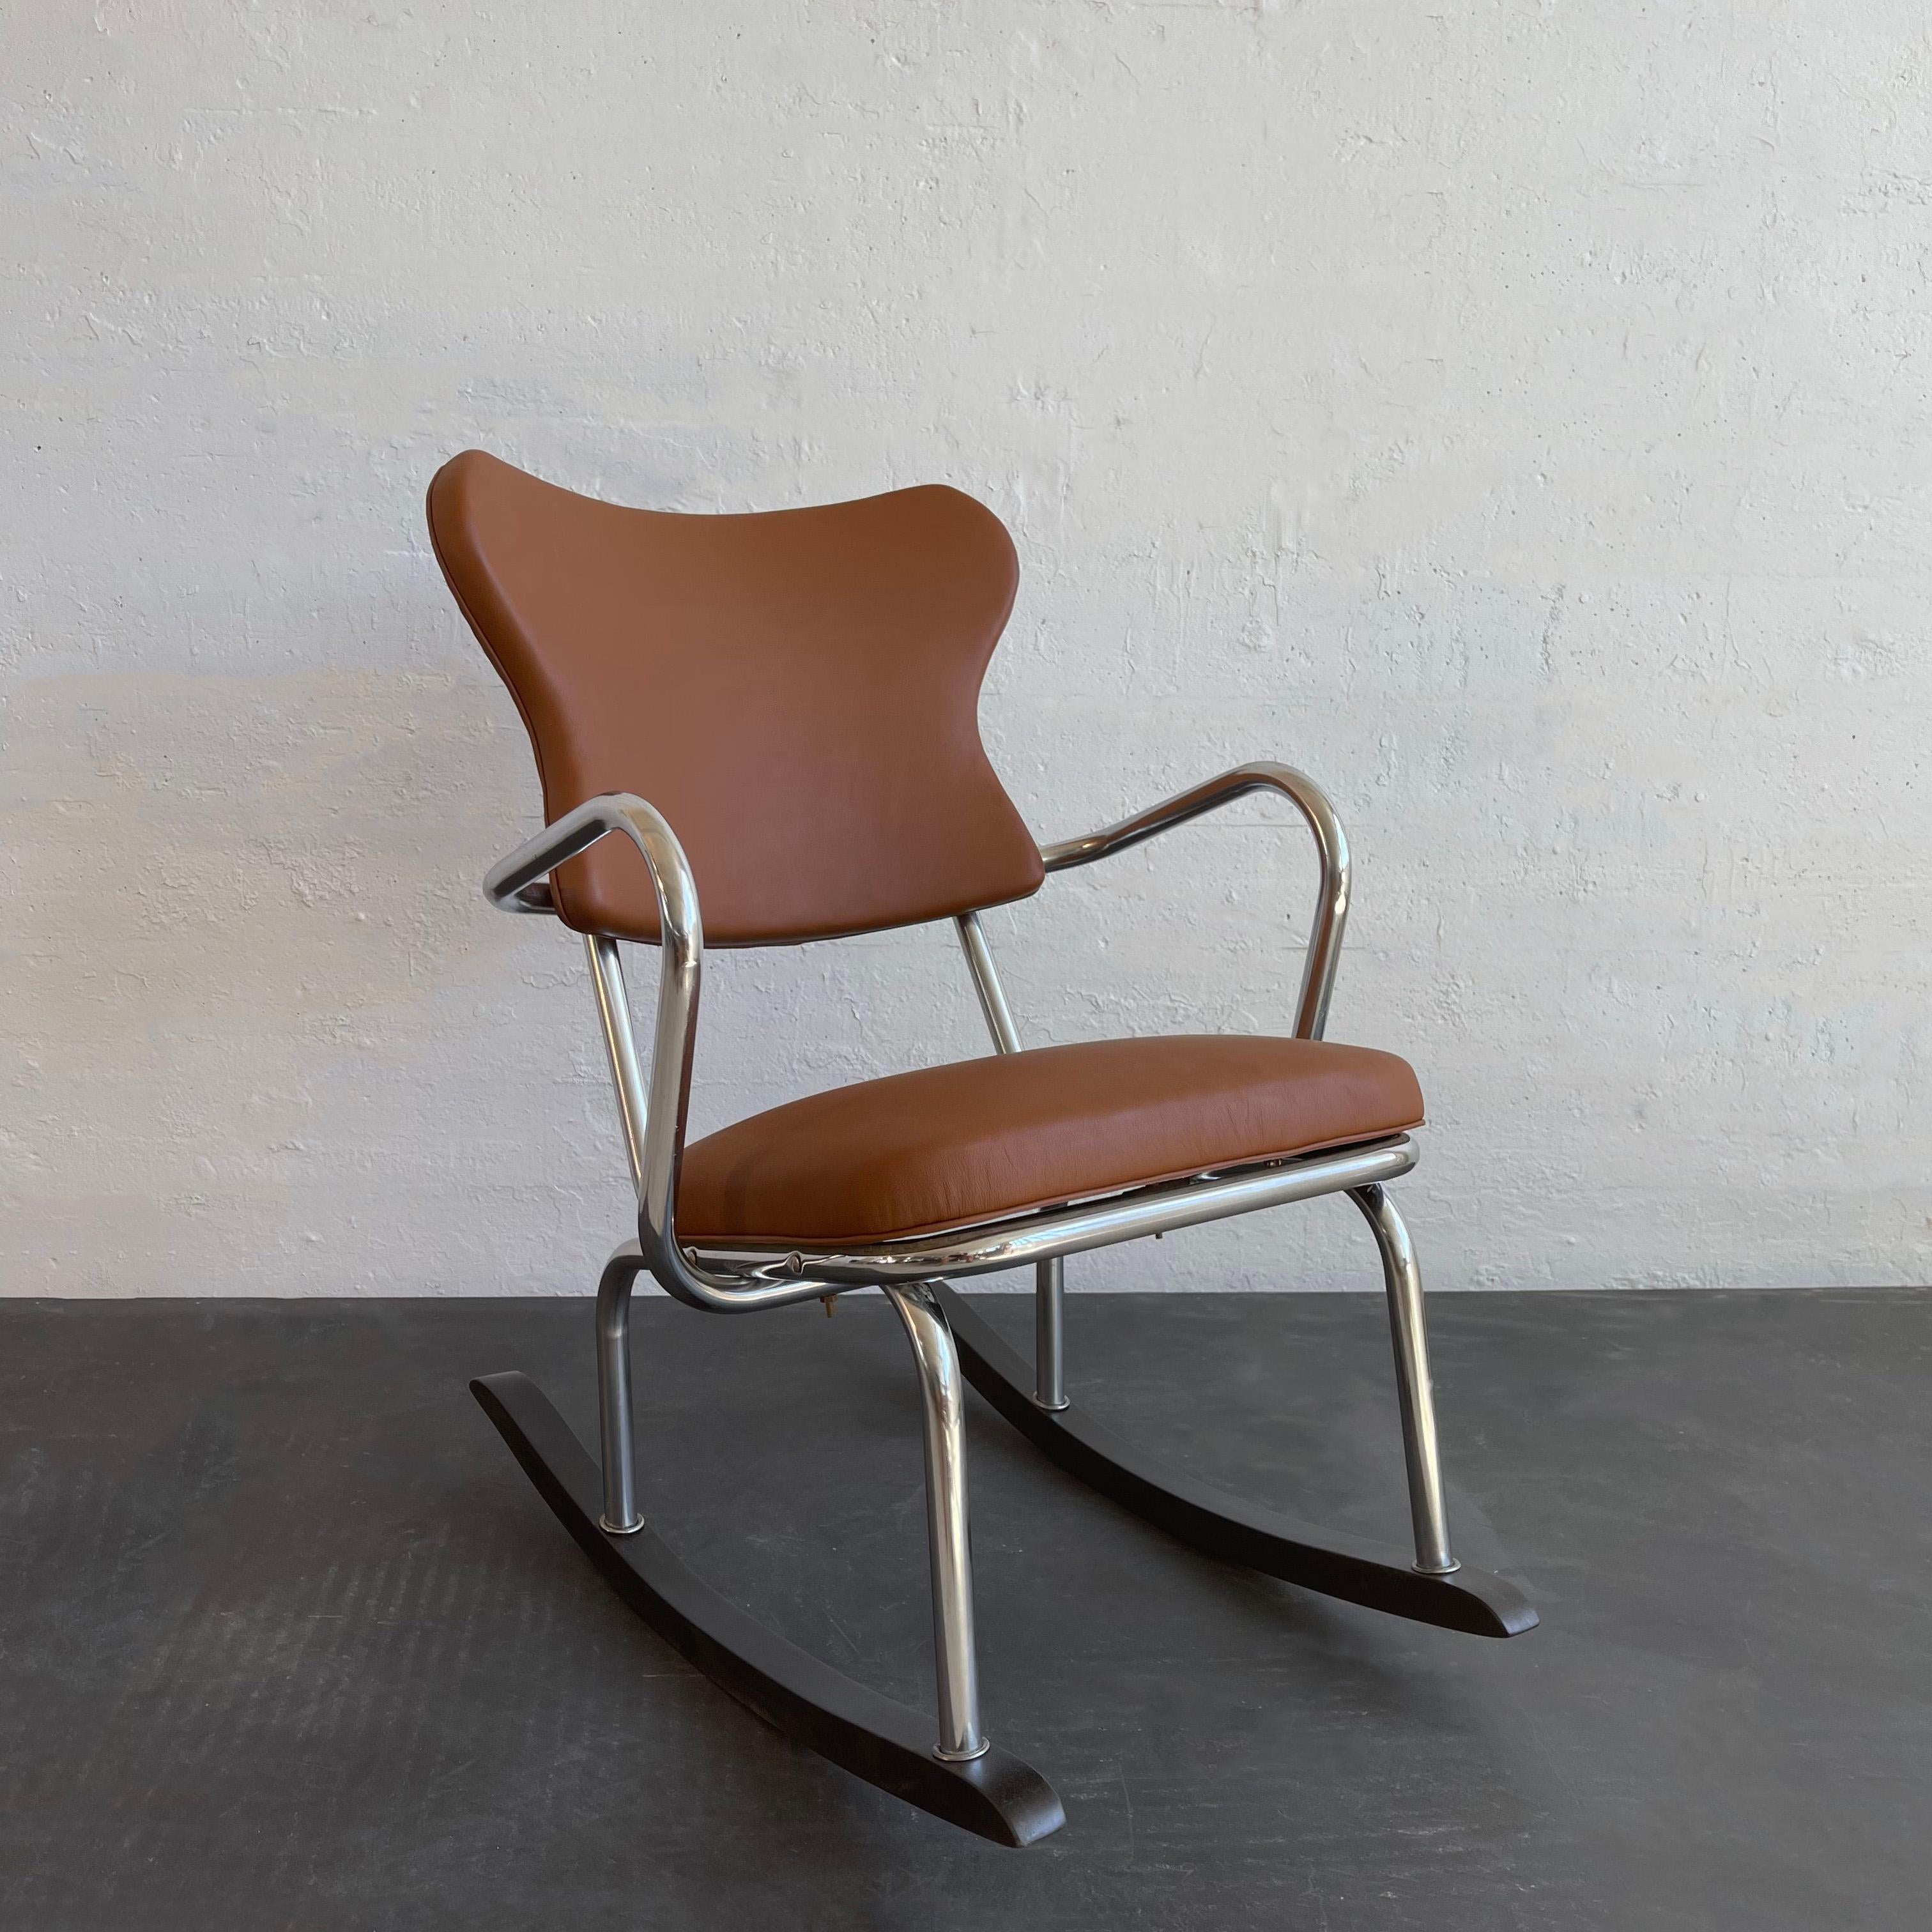 Art deco, machine-age rocking chair in the manner of designers Gilbert Rohde and Kem Weber features a bent chrome frame on black lacquered wood rockers with contoured back. The back and seat are newly upholstered in burnt sienna leather. 